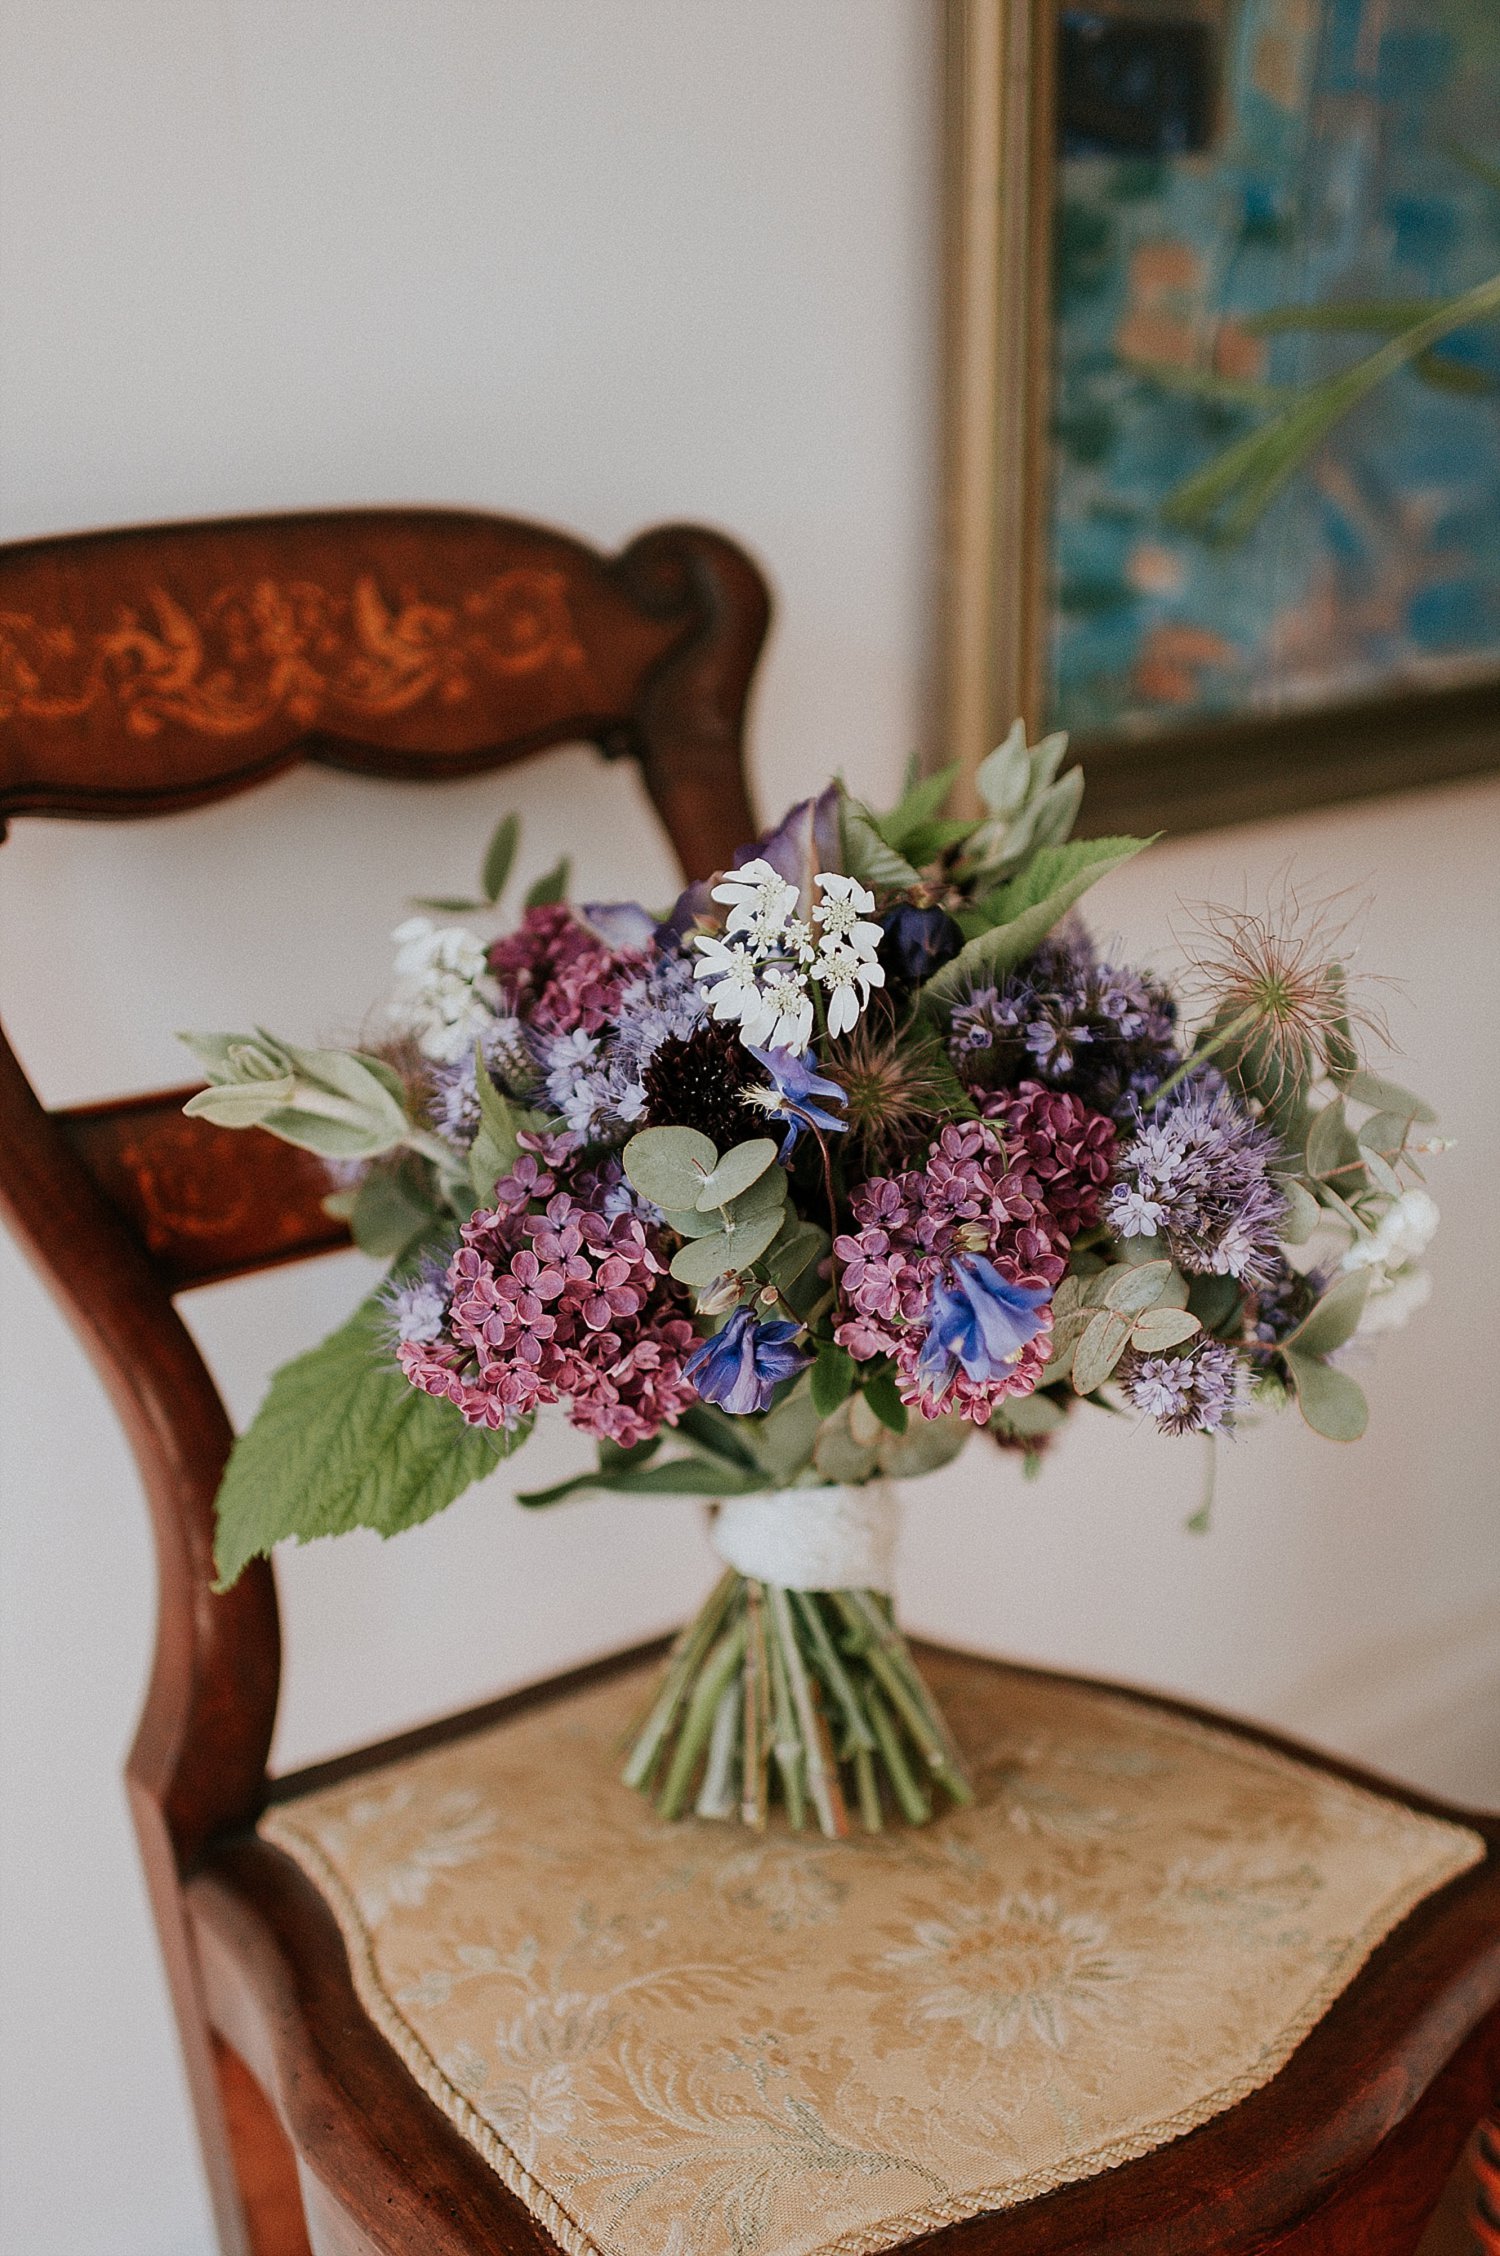 wedding bouquet of pink purple blue white flowers on vintage chair | Aero Island wedding planners | Denmark weddings and florists